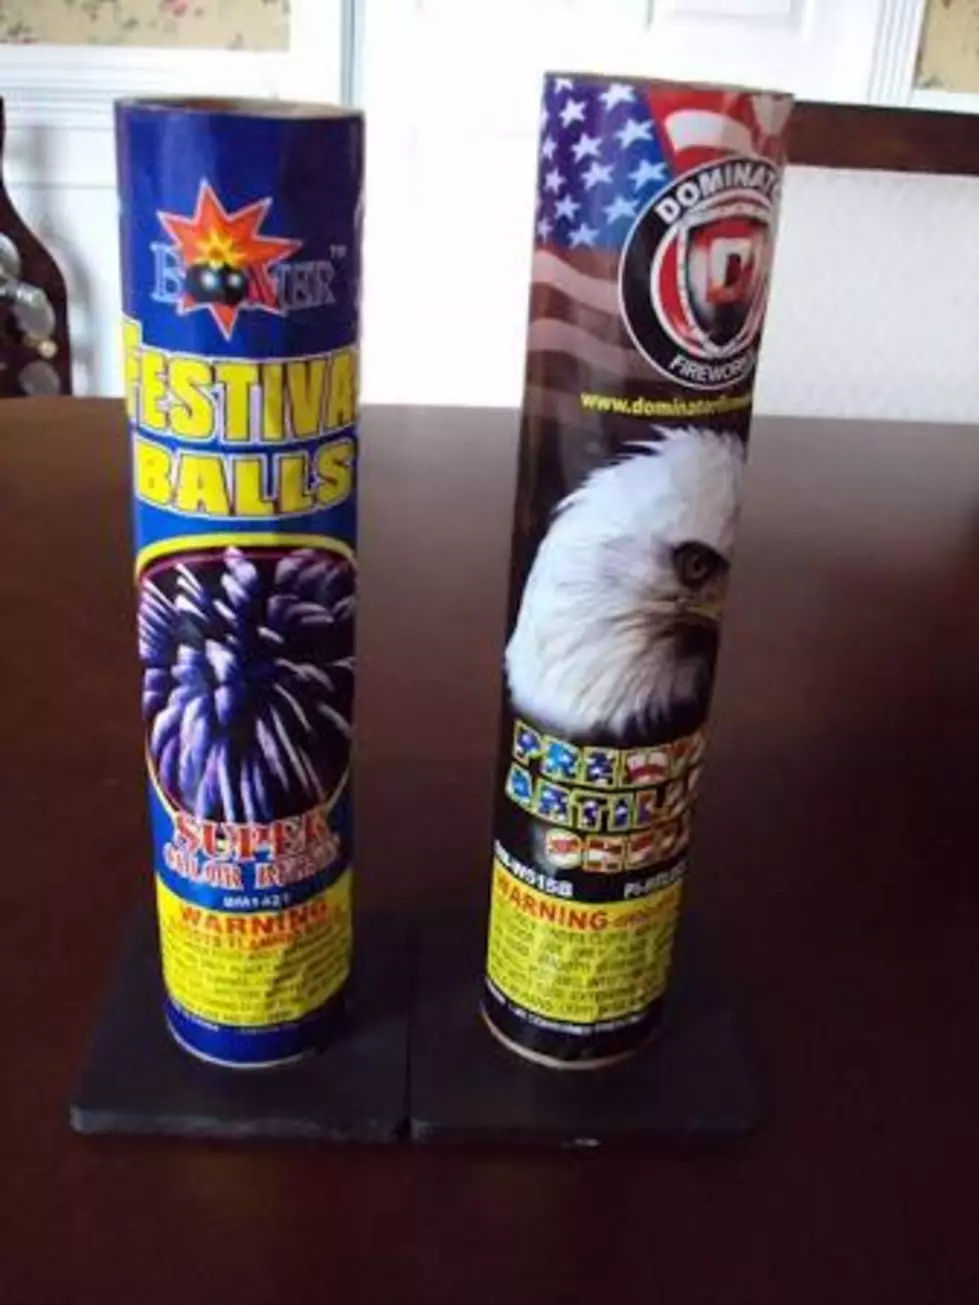 You May Want to Stay Away From This Type of Firework This July 4th